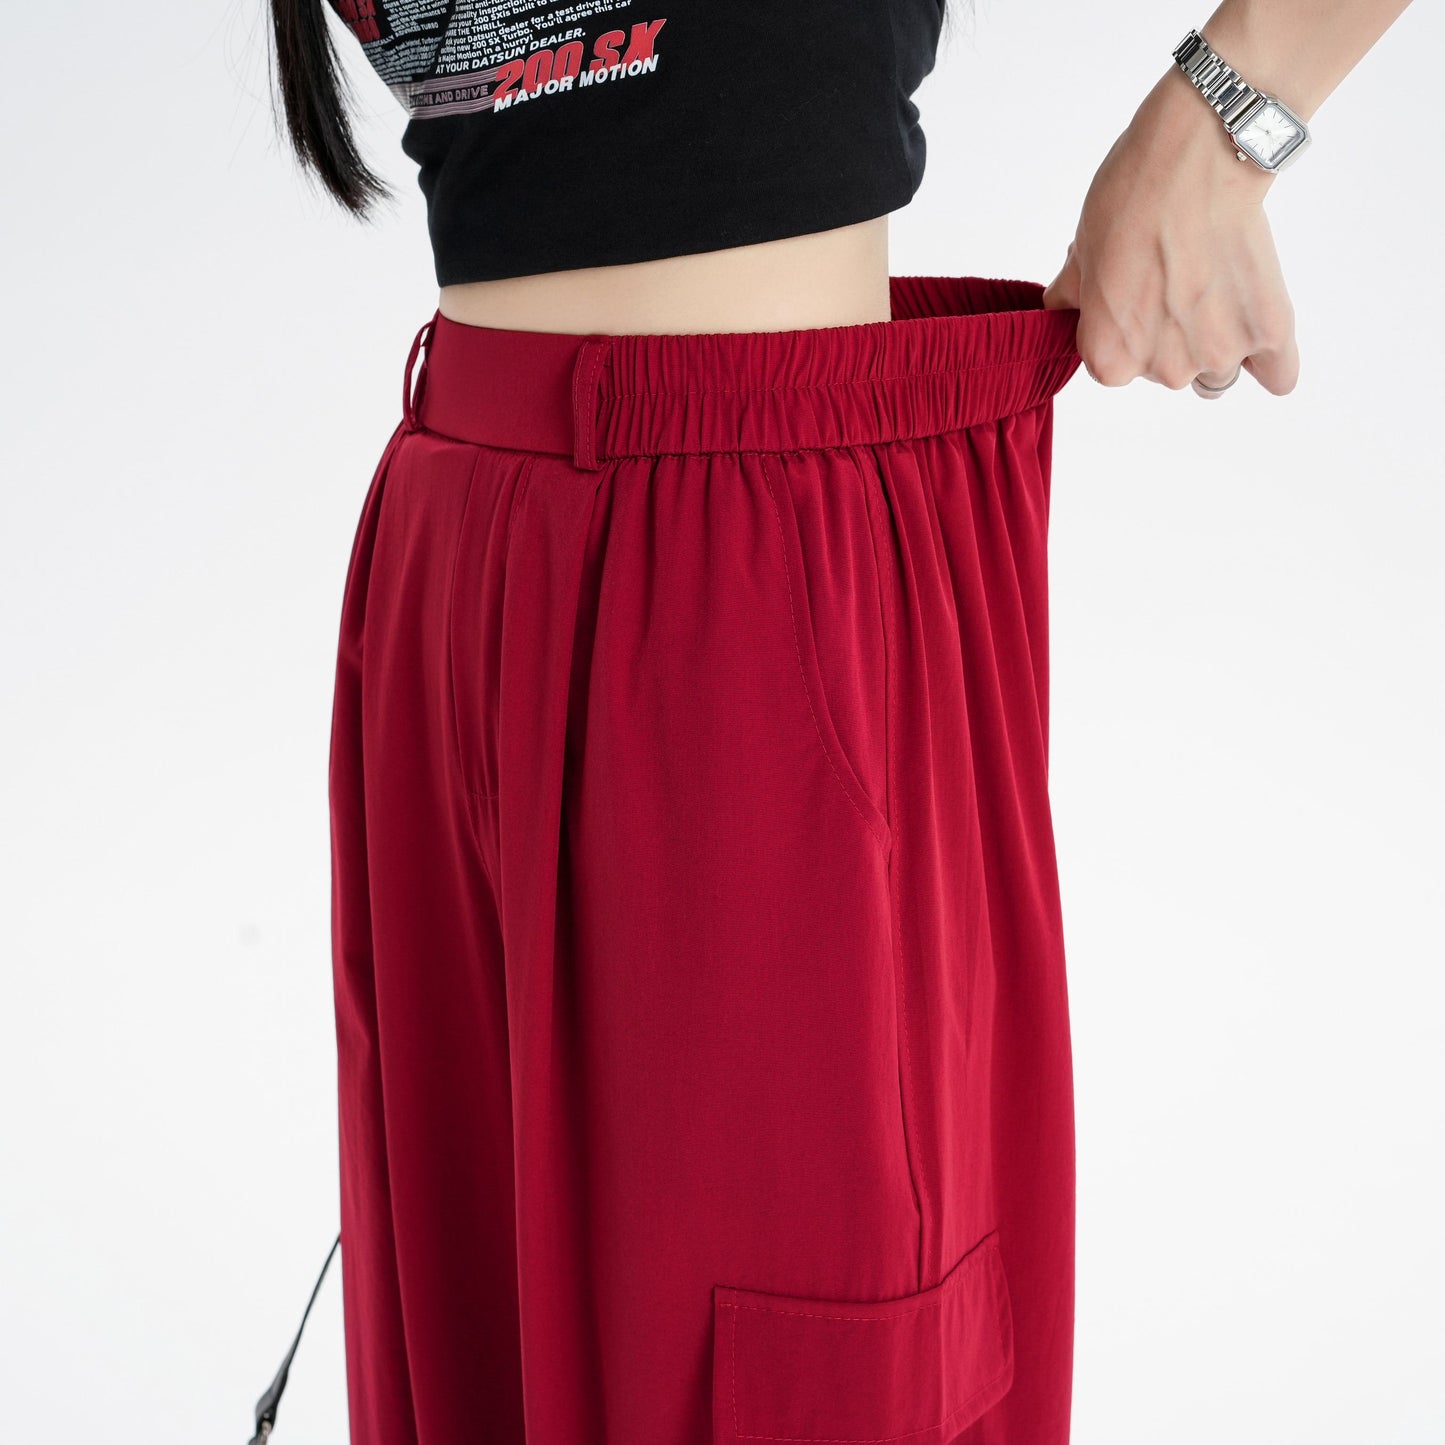 Silky High-Waisted Loose Fit Tapered Sports Thin Casual Quick-Drying Pants